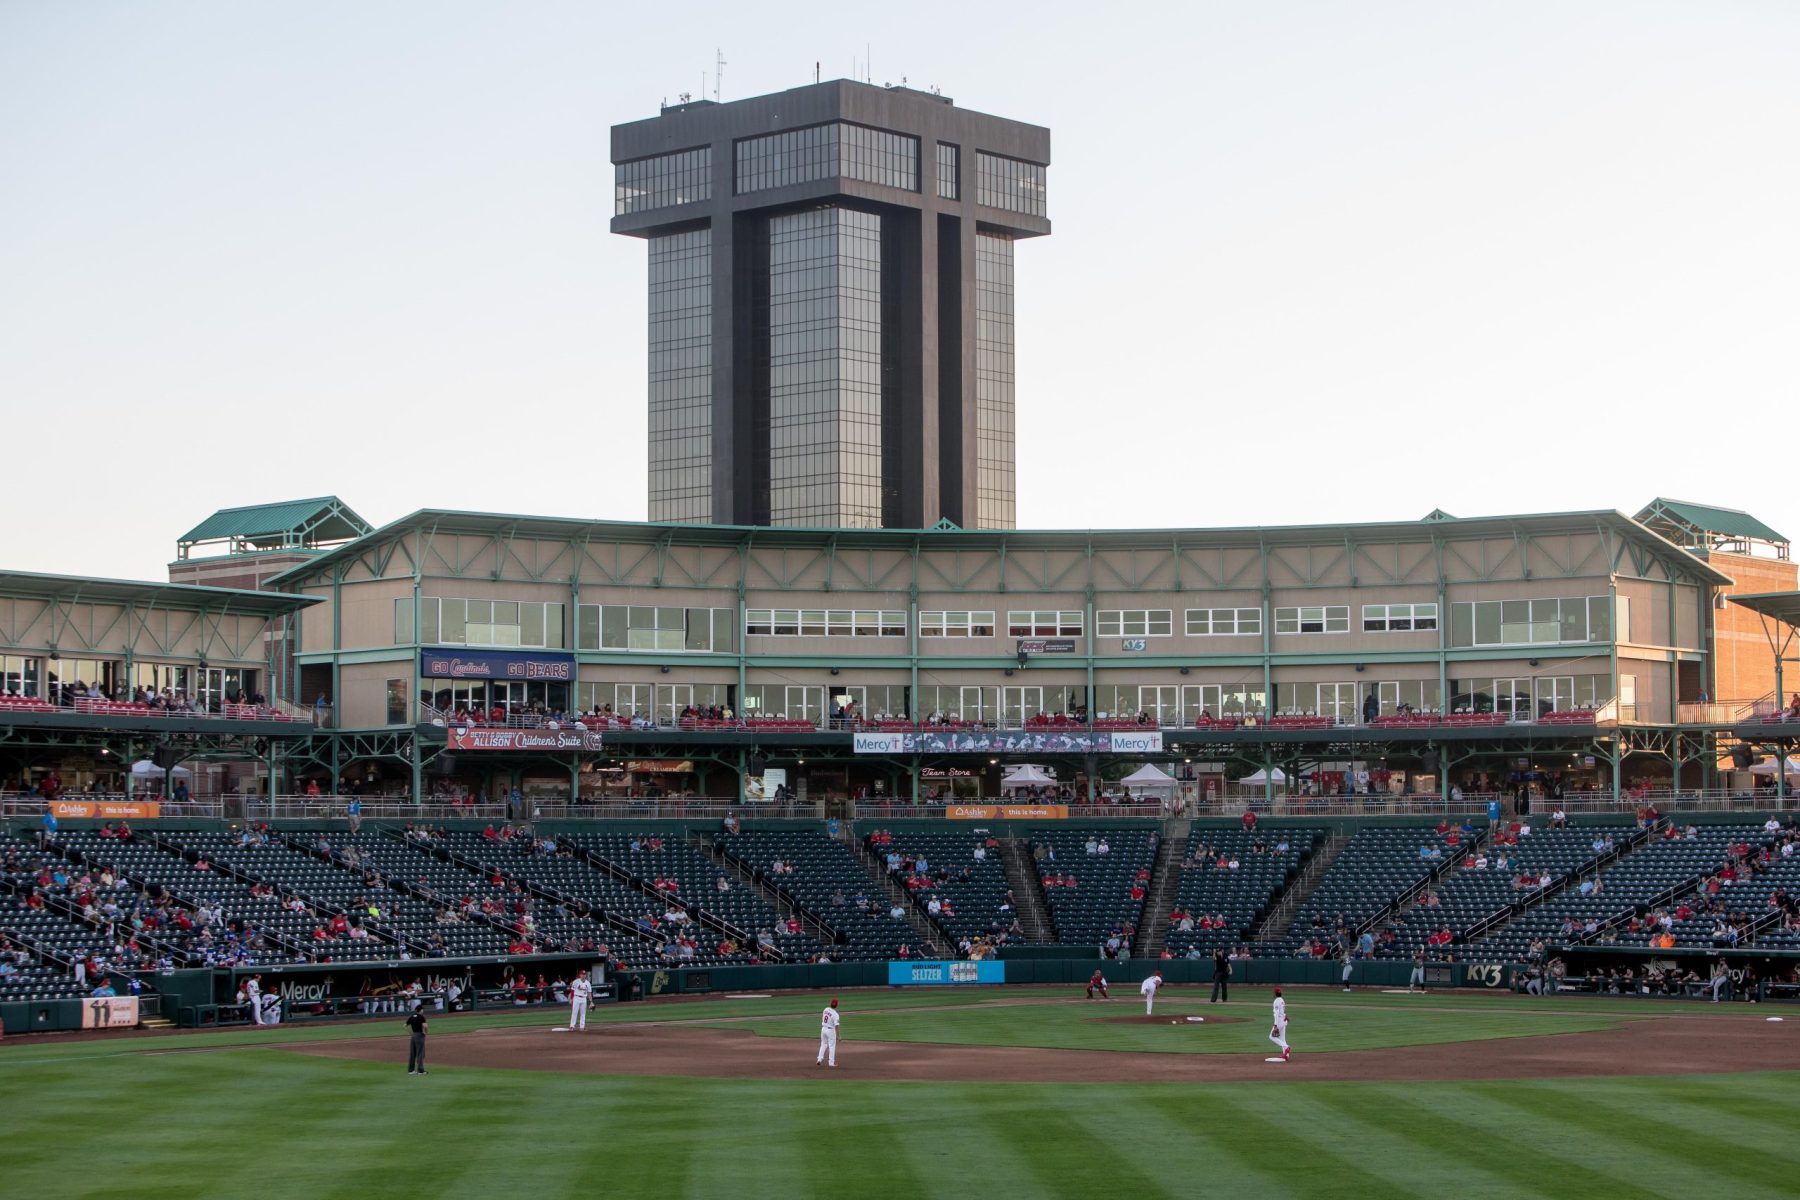 The Springfield Cardinals at Hammons Field, with box seats and Tower in the background.